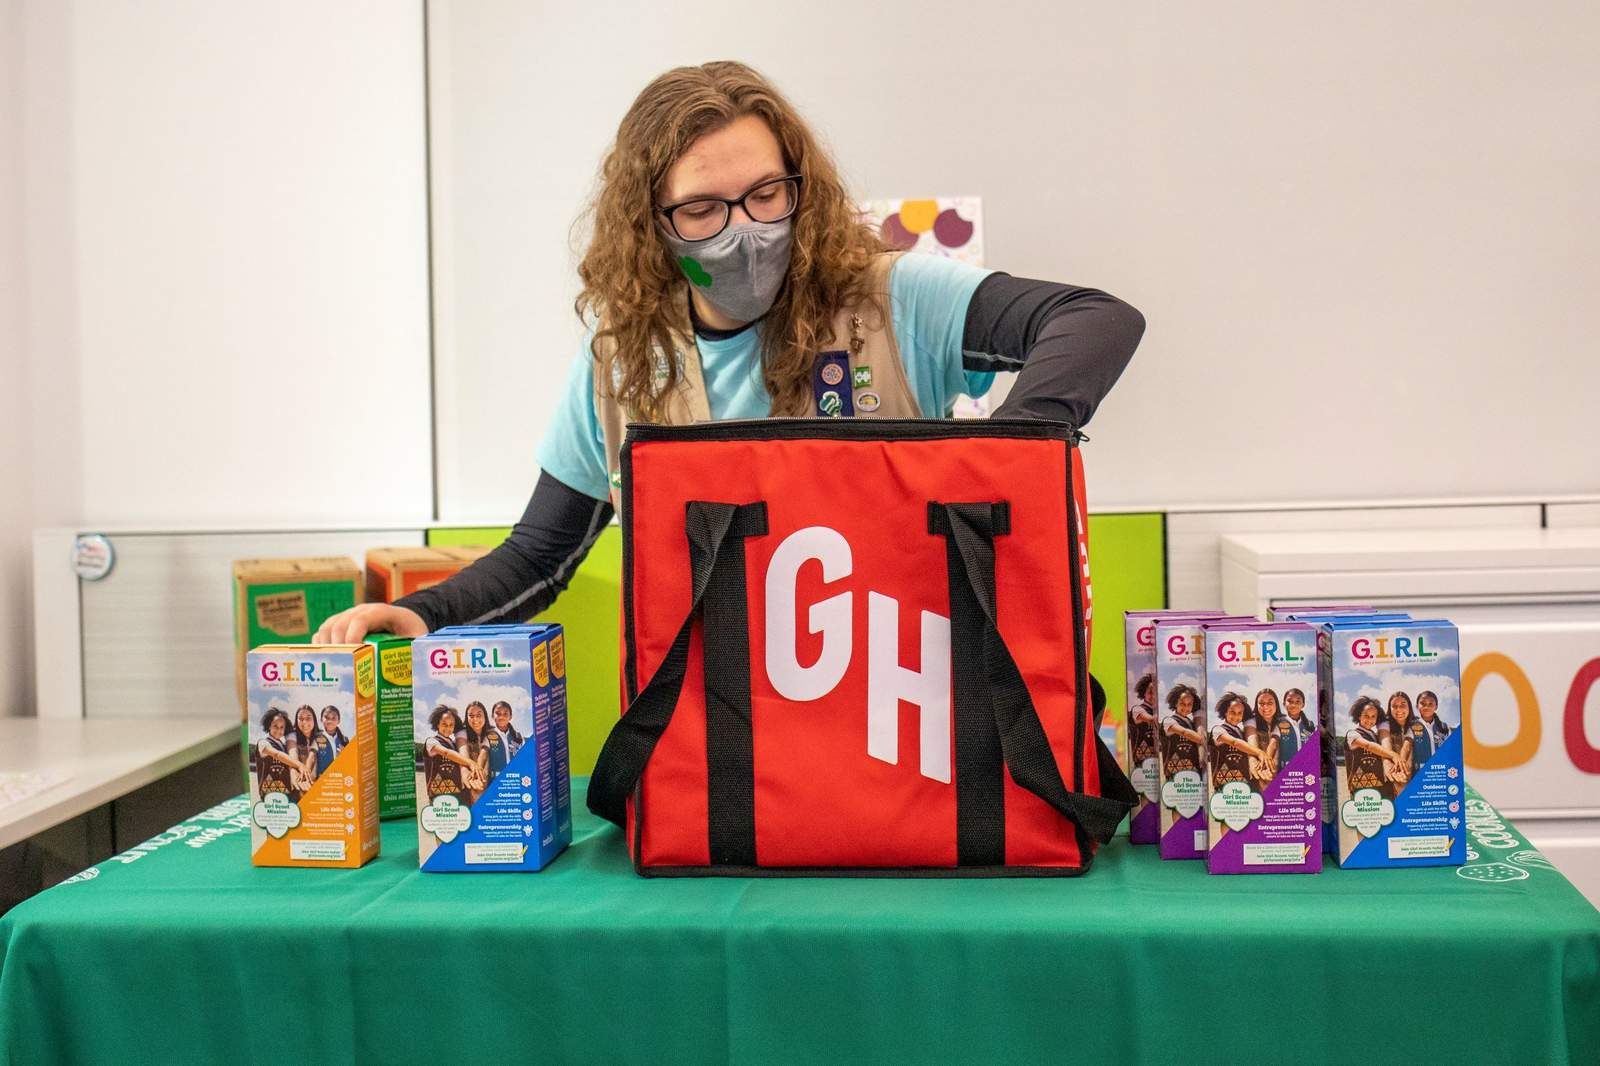 Rejoice, sugar fiends! This year, you can order Girl Scout Cookies online and on Grubhub